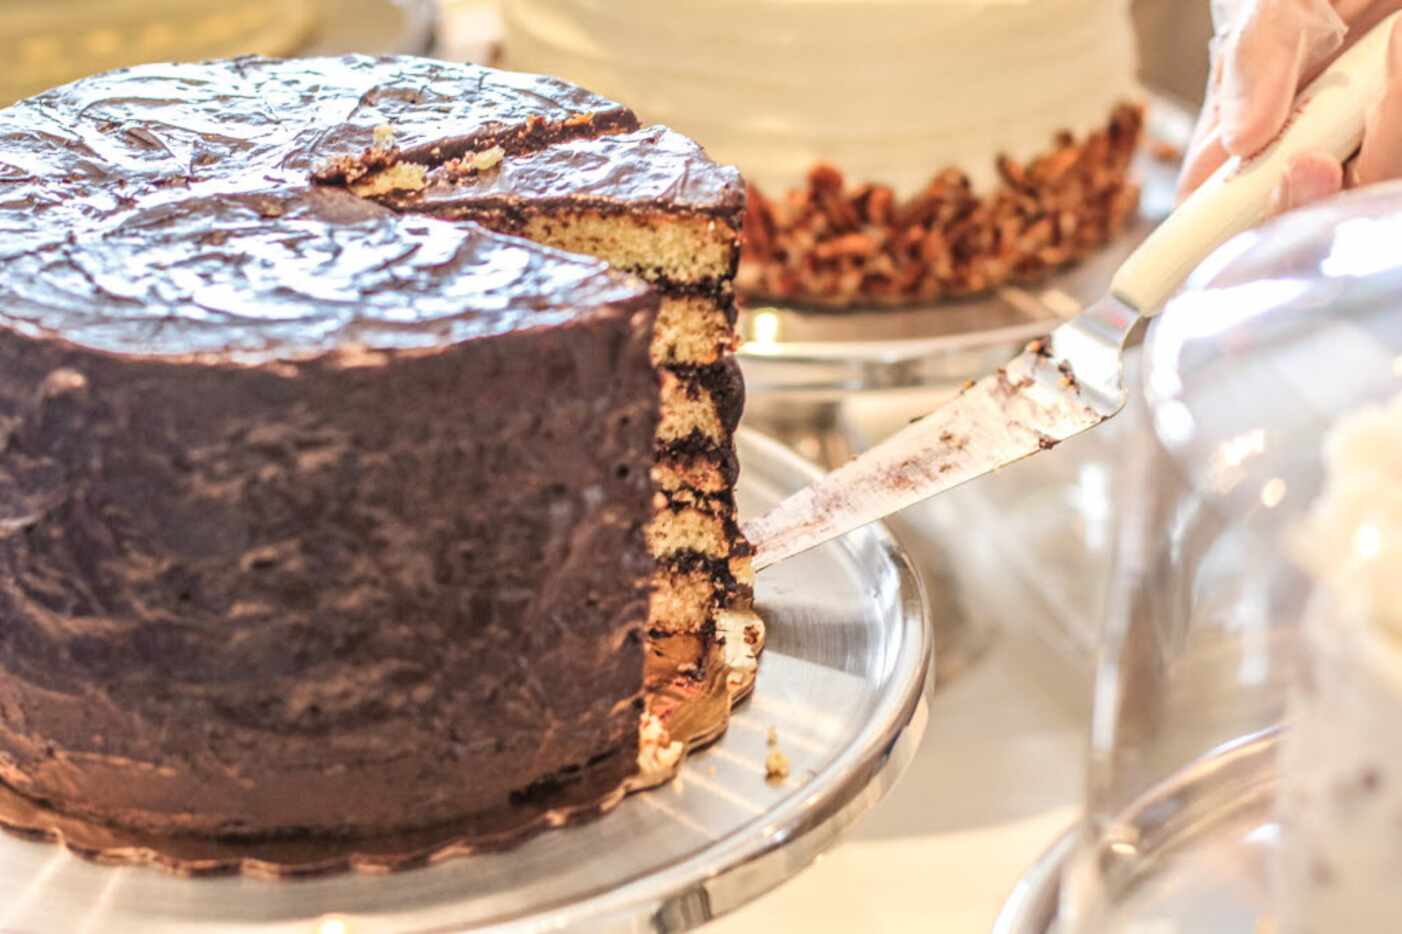 Old Fashioned Chocolate cake is one of the items offered at Cake Bar in Trinity Groves the...